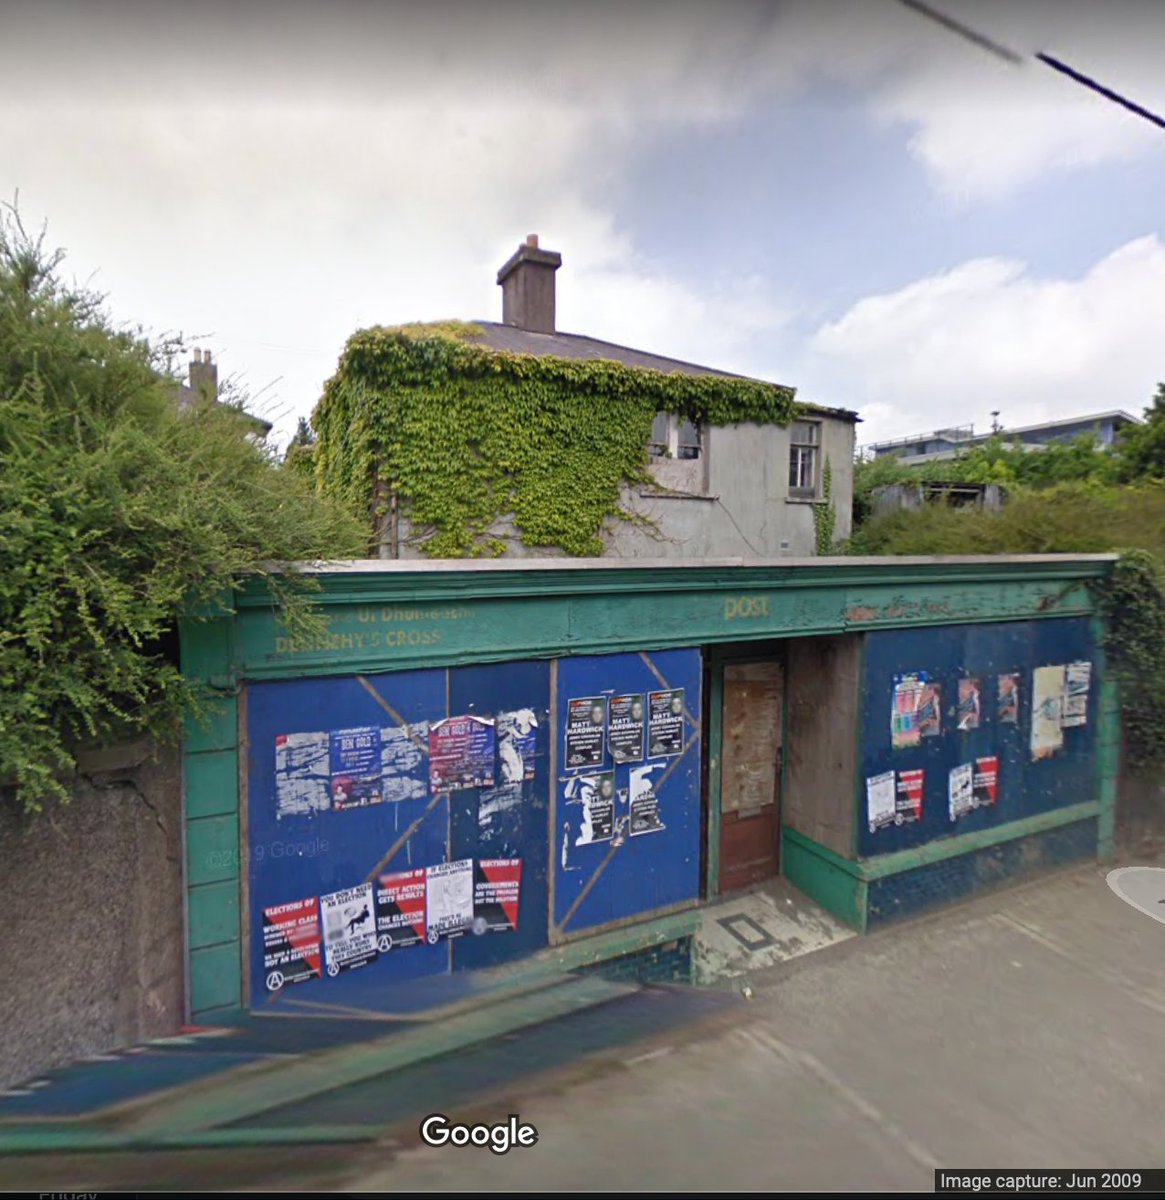 on Christmas Eve what better present than a home behind yesterdays decaying post office is a house derelict for years, image bottom RHS is from 2009  @googlemapsit really should be someones home in Cork cityNo.229  #HousingForAll  #Wellbeing  #respect  #homelessness